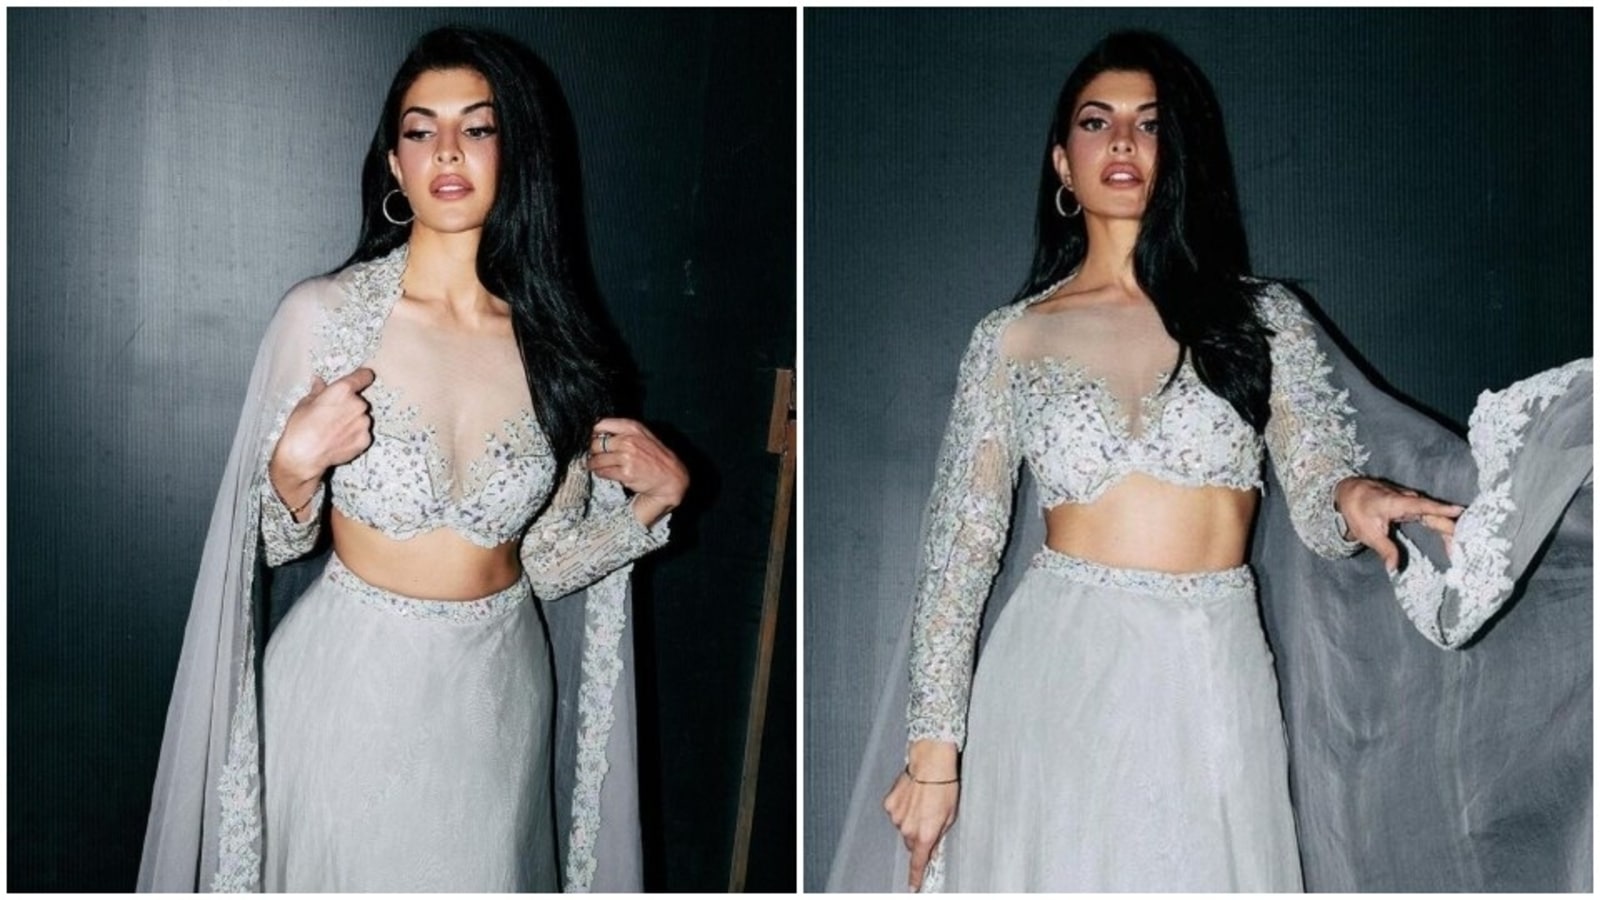 Jacqueline Fernandez Porn Image - Jacqueline Fernandez's pearl-grey lehenga and stylish blouse is for the  modern bride to rock at winter wedding: All pics | Fashion Trends -  Hindustan Times